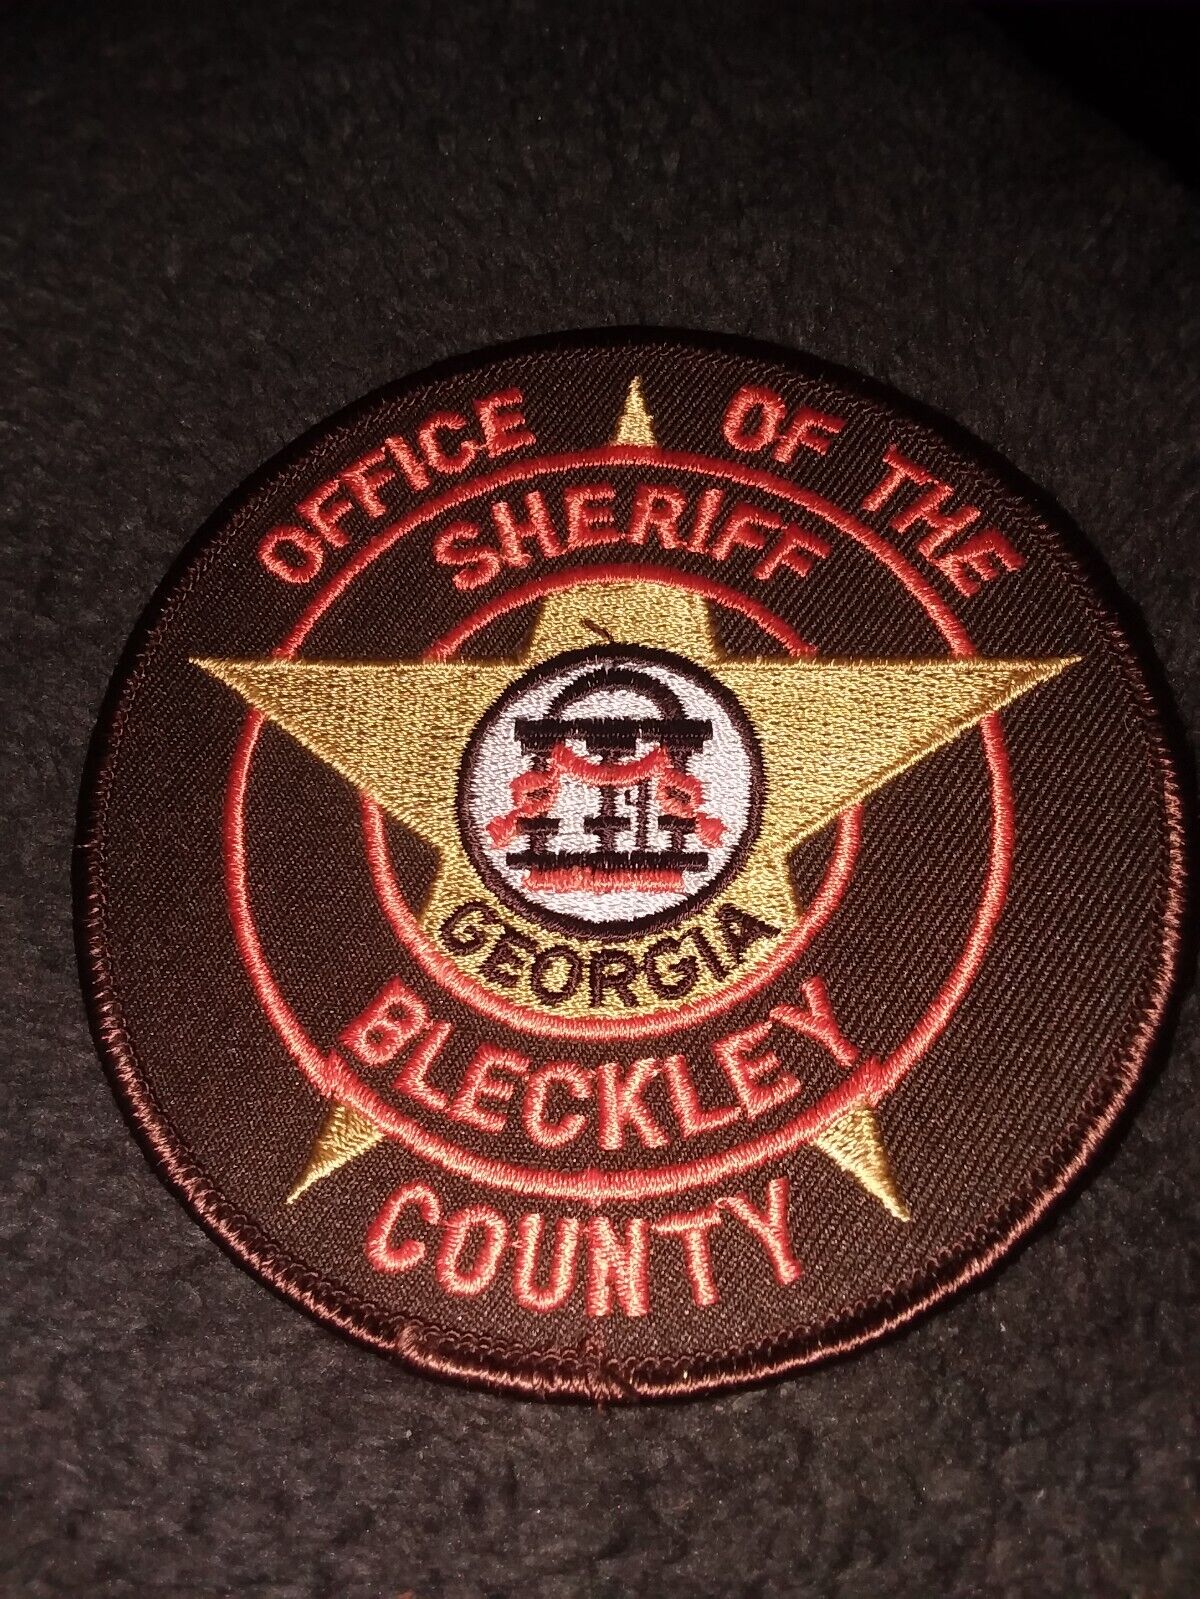 Bleckley County Georgia Sheriff Police Department Patch